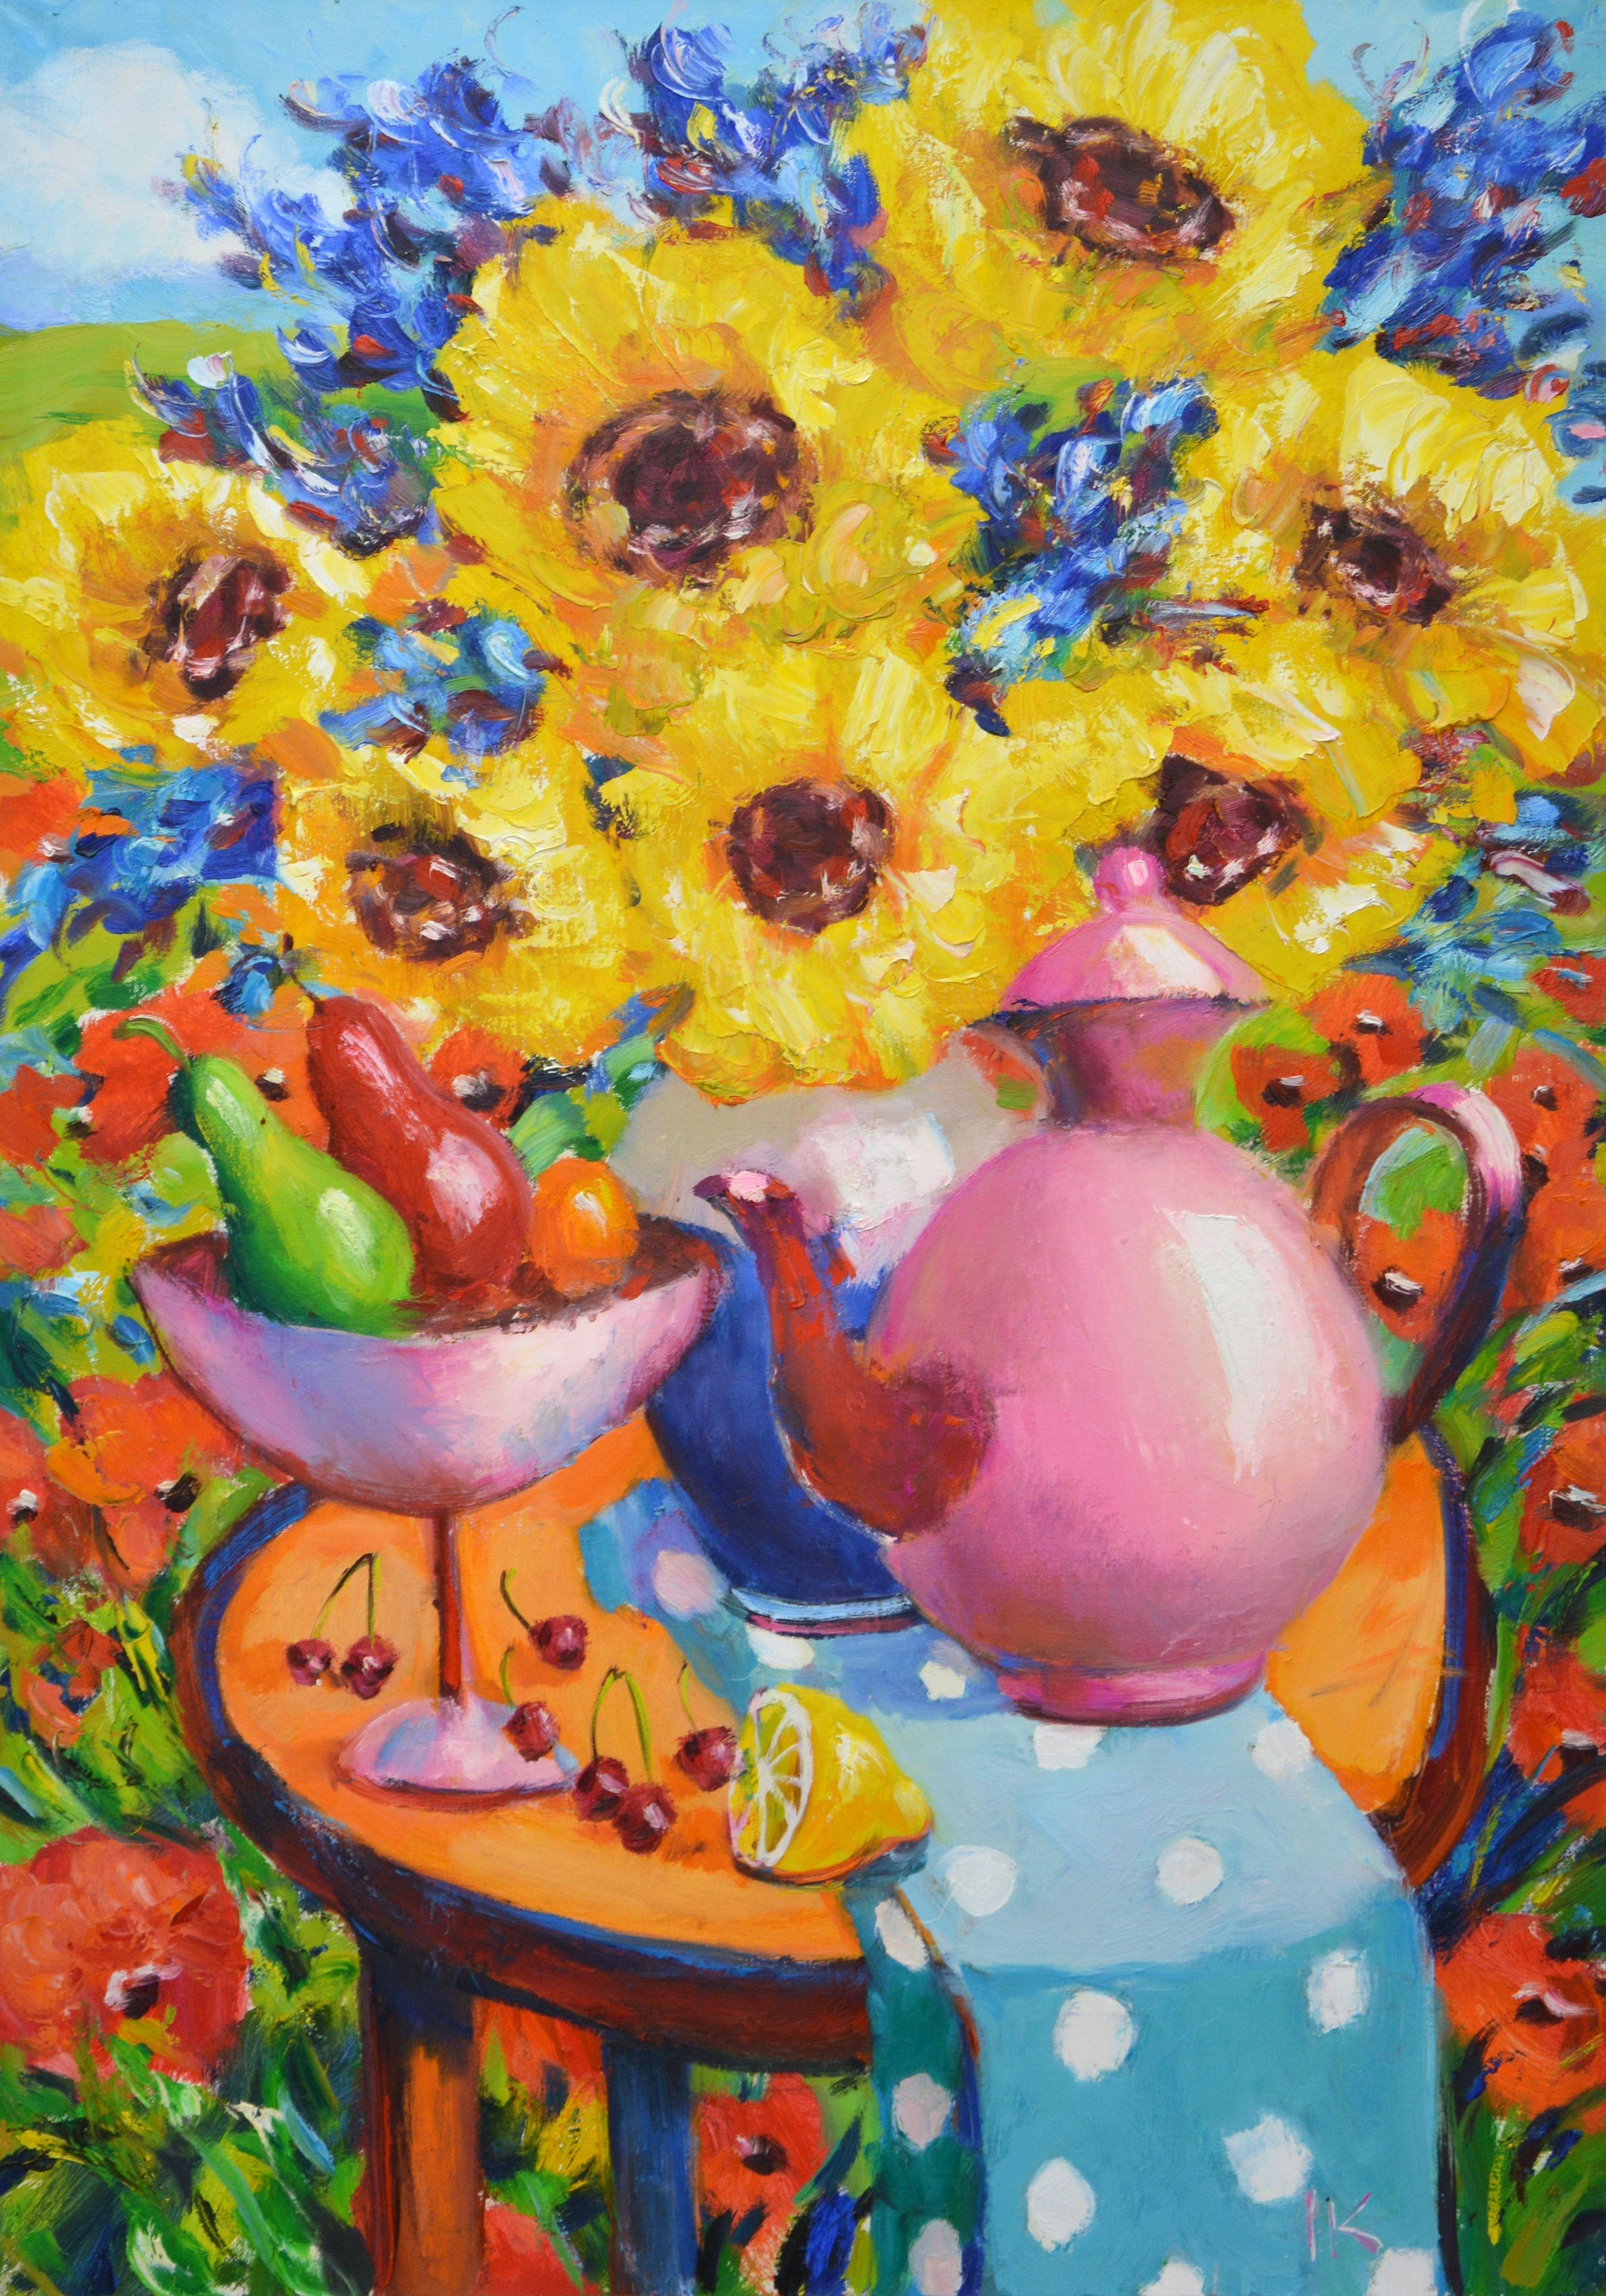 Tea in the garden. Still life in nature: On the table there is a bouquet of sunflowers in a vase, a teapot, cherries, fruits: pears, tangerines, lemon. Expressionism. Modern. Still life in oil on linen canvas. It is varnished. Artist's signature.